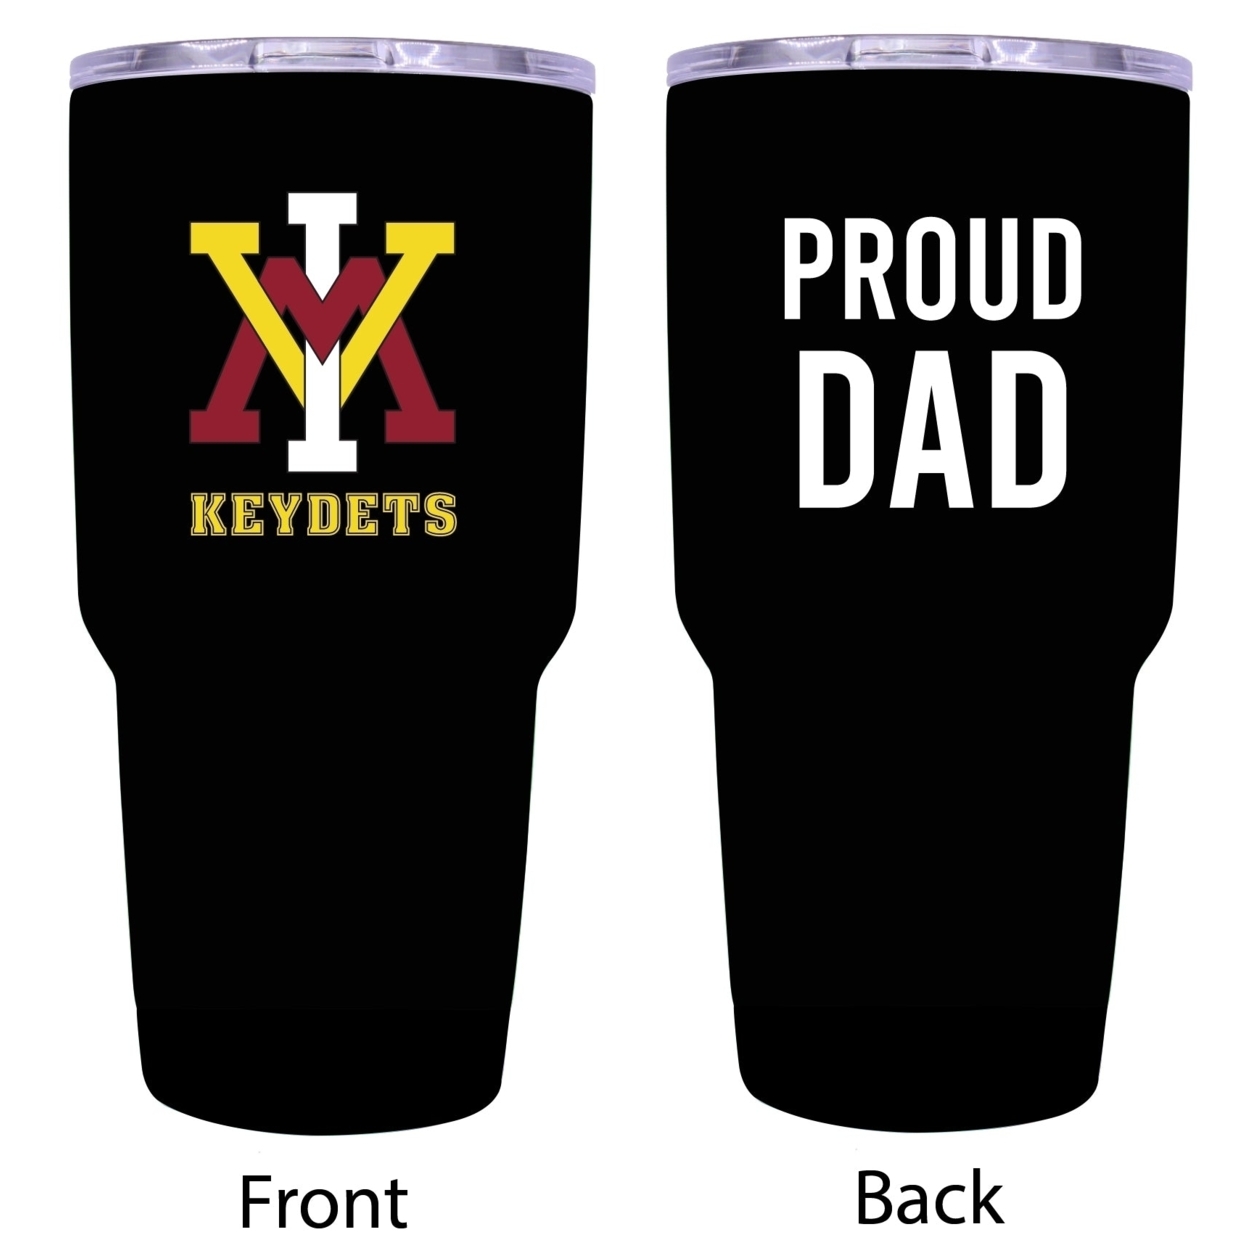 VMI Keydets Proud Dad 24 Oz Insulated Stainless Steel Tumblers Choose Your Color. - Black